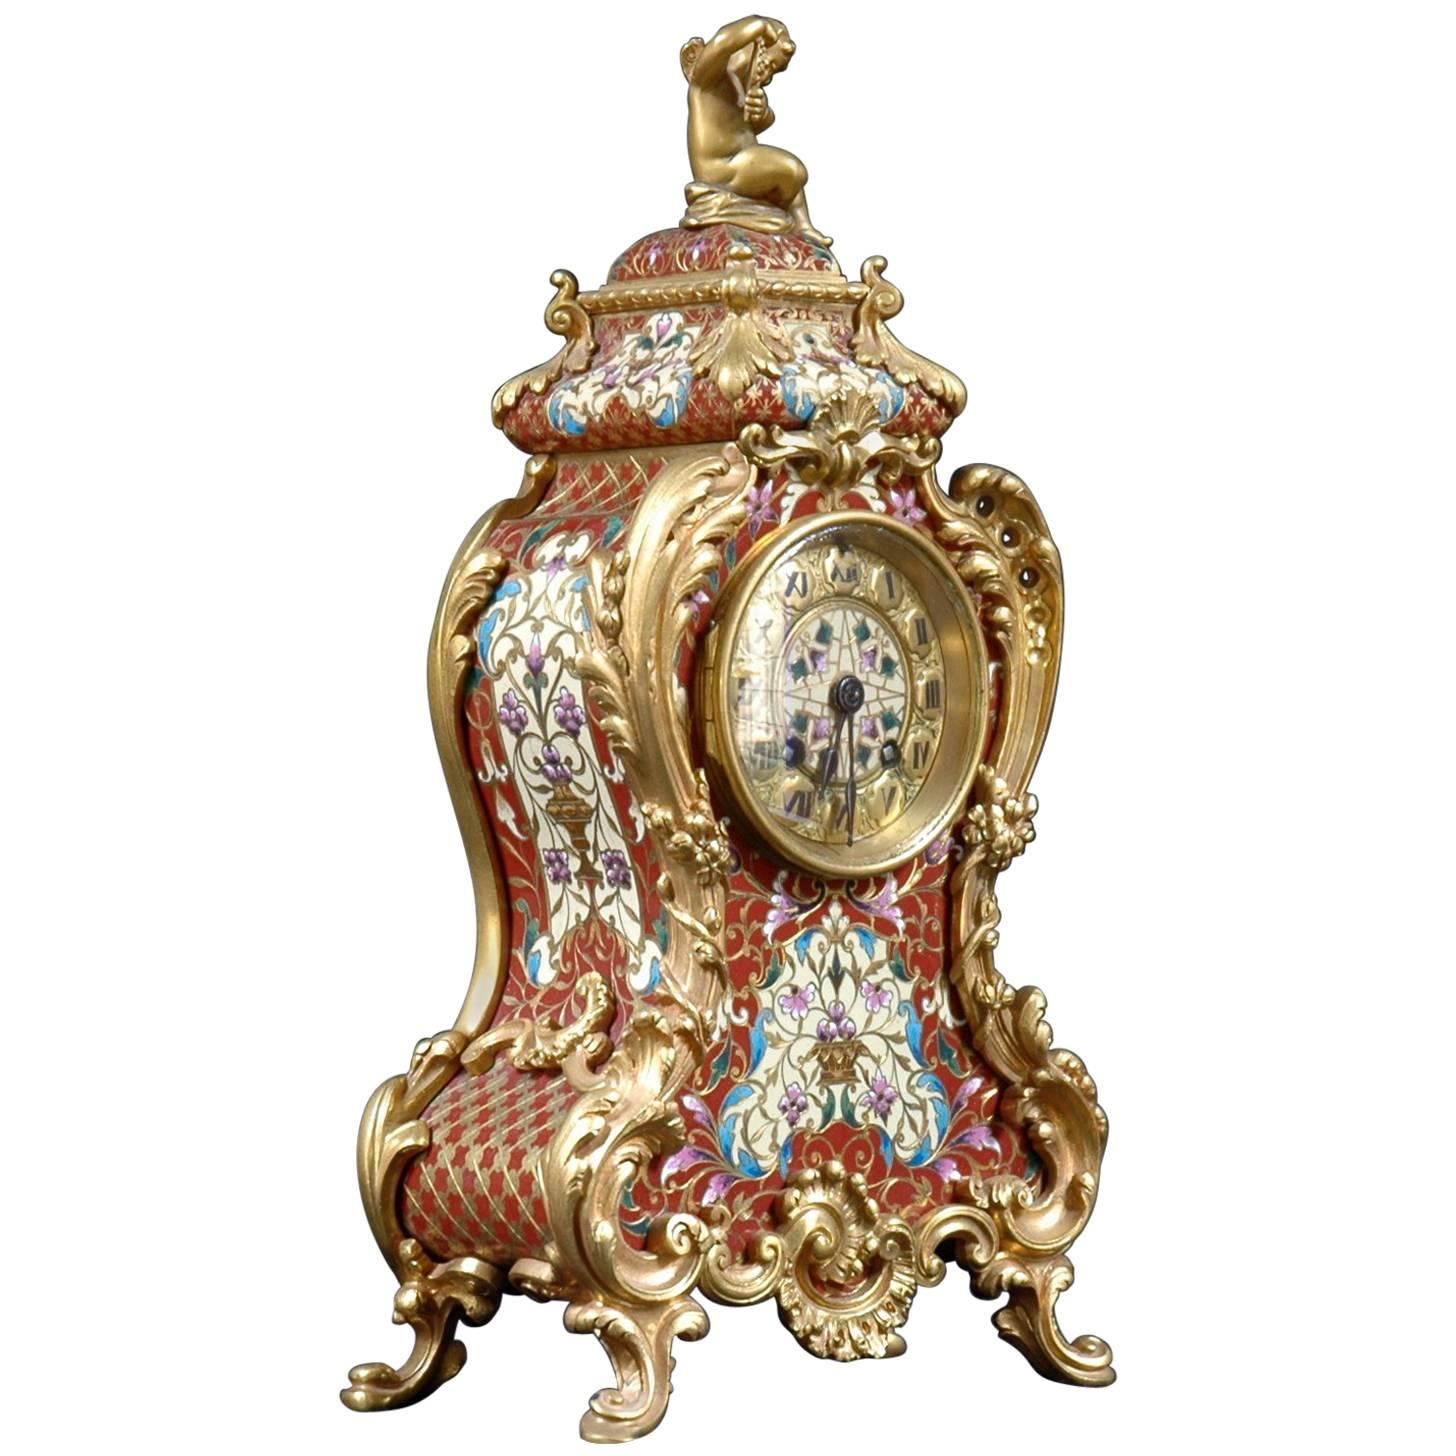 19th Century Tiffany Champleve Enameled Mantel or Bracket Clock For Sale